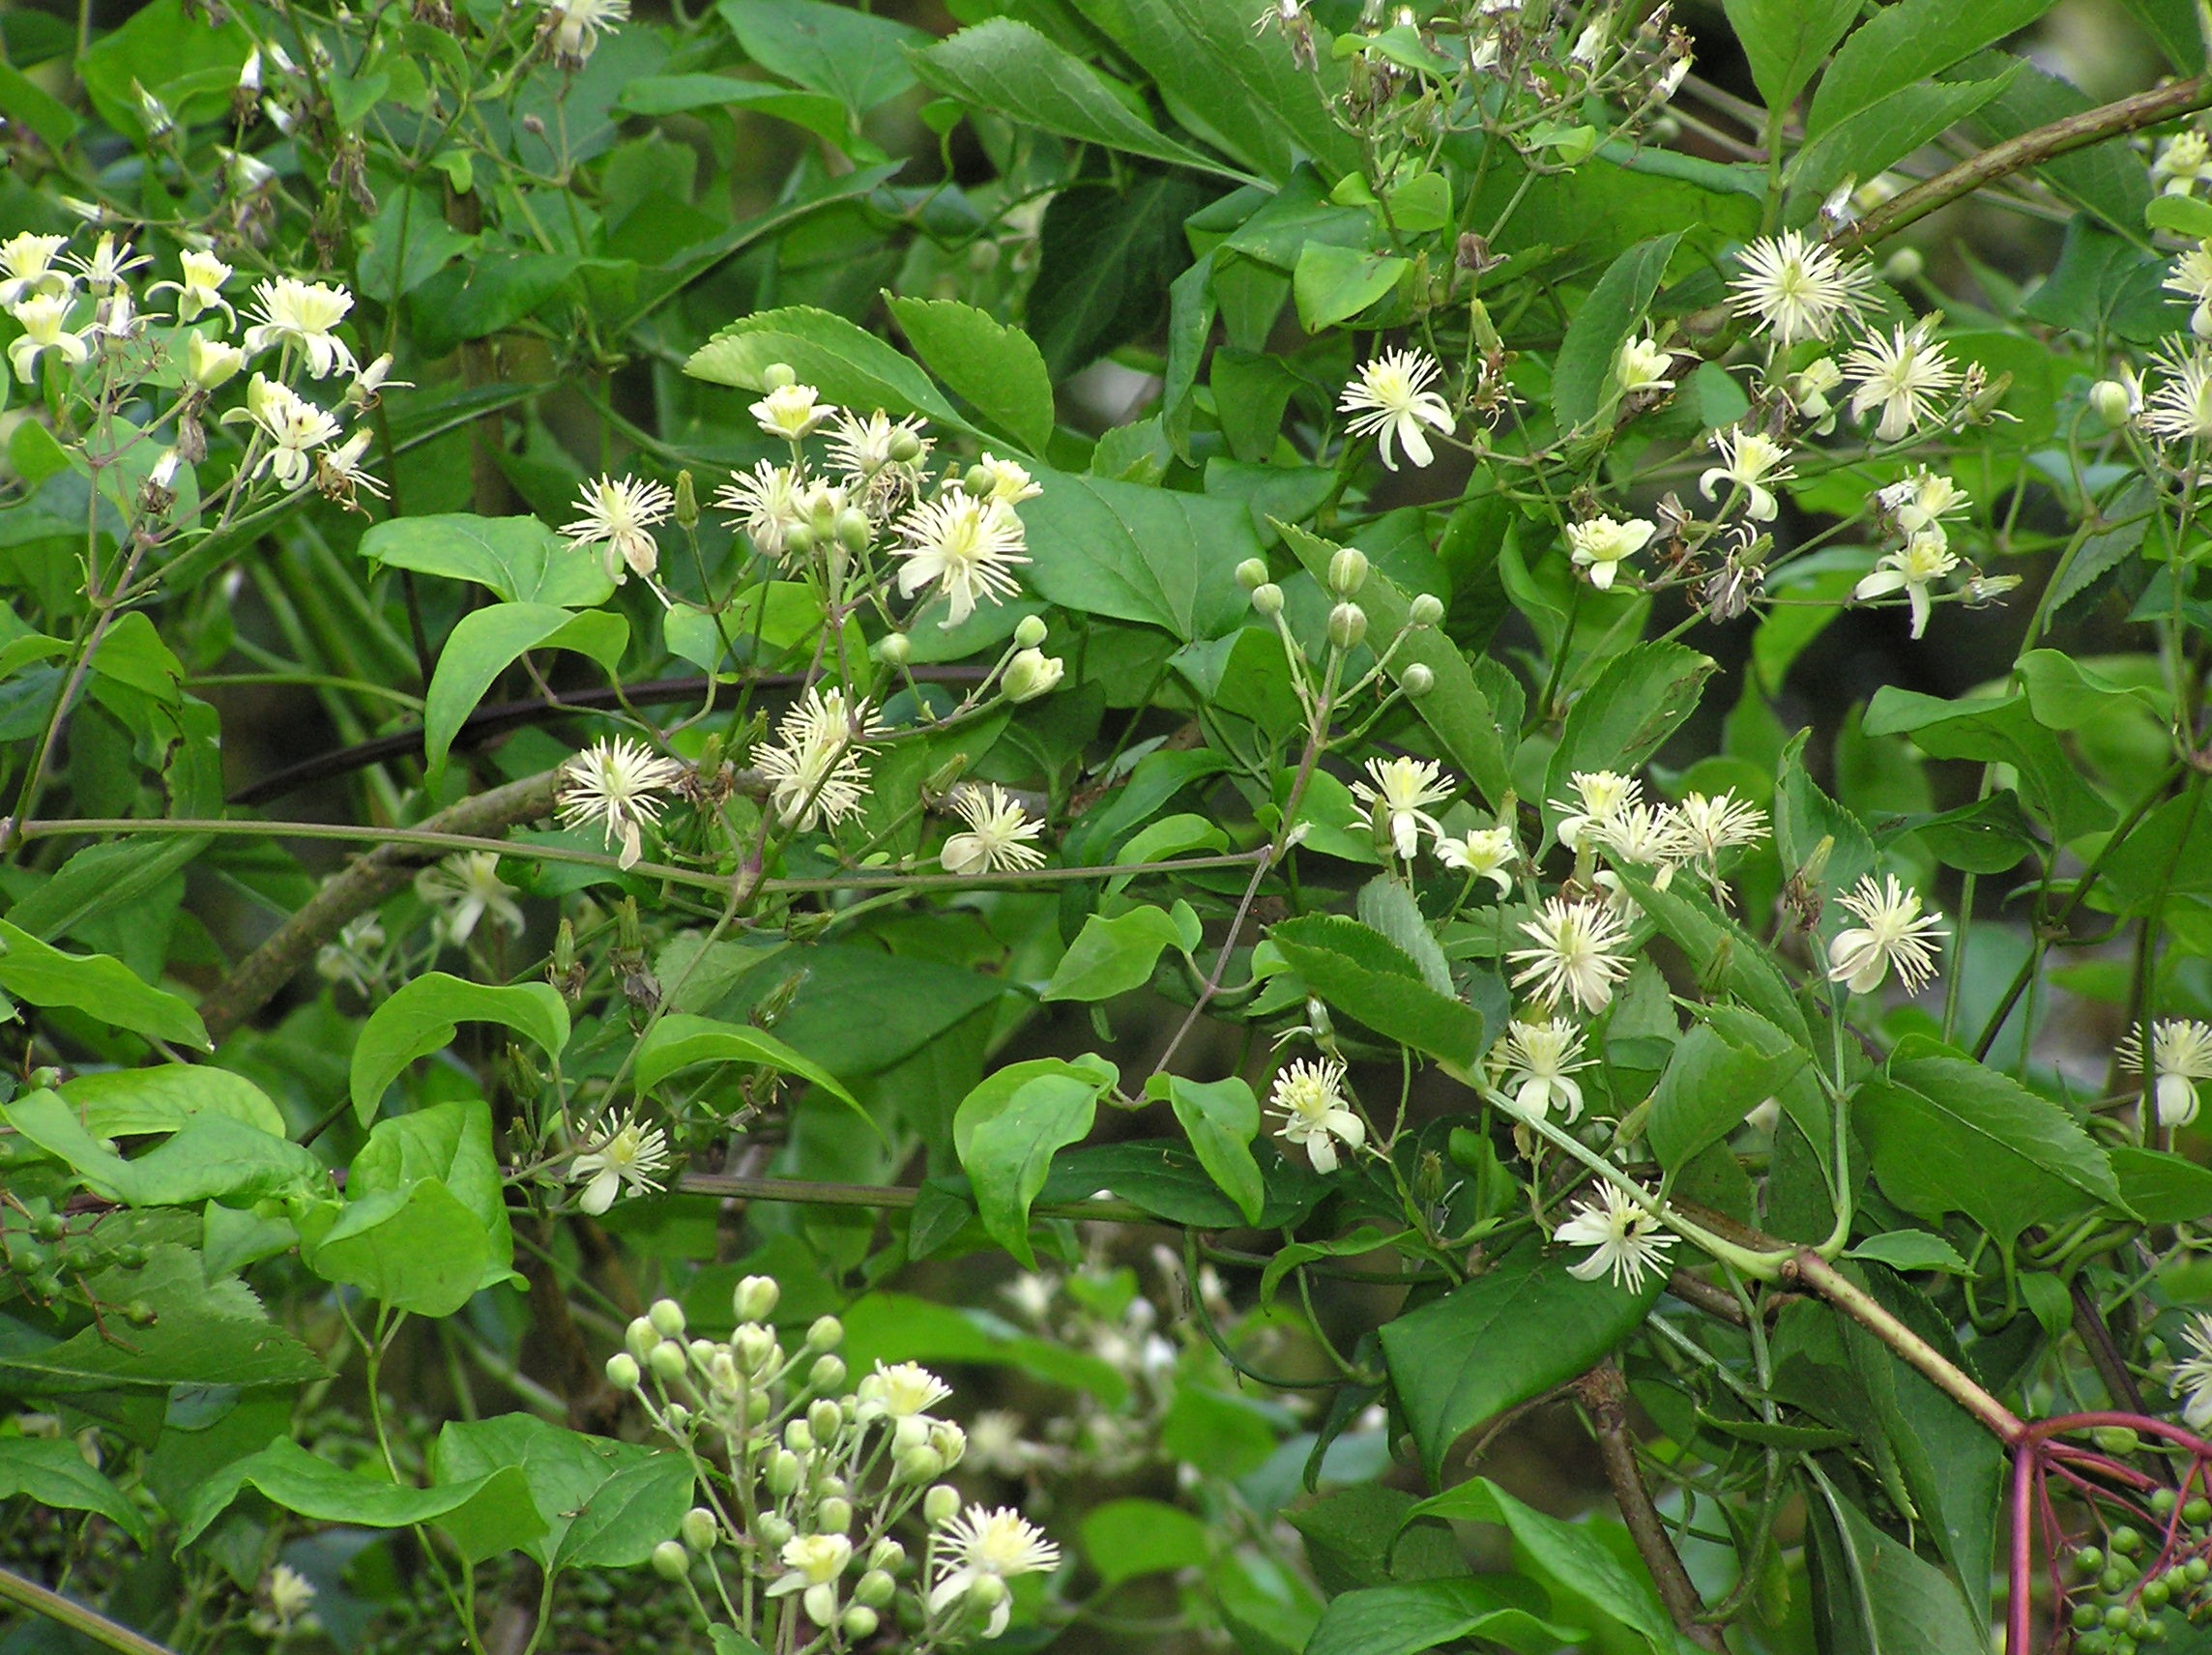  There are two specimens of Traveller's-joy, Clematis vitalba, in the wood. Although common in the South of England, here in the north this plant has a local distribution with only a scattering of plants from here to southern Scotland. Further plants can be found along the side of the road between Wetherby and Walton and at the top end of Collingham.